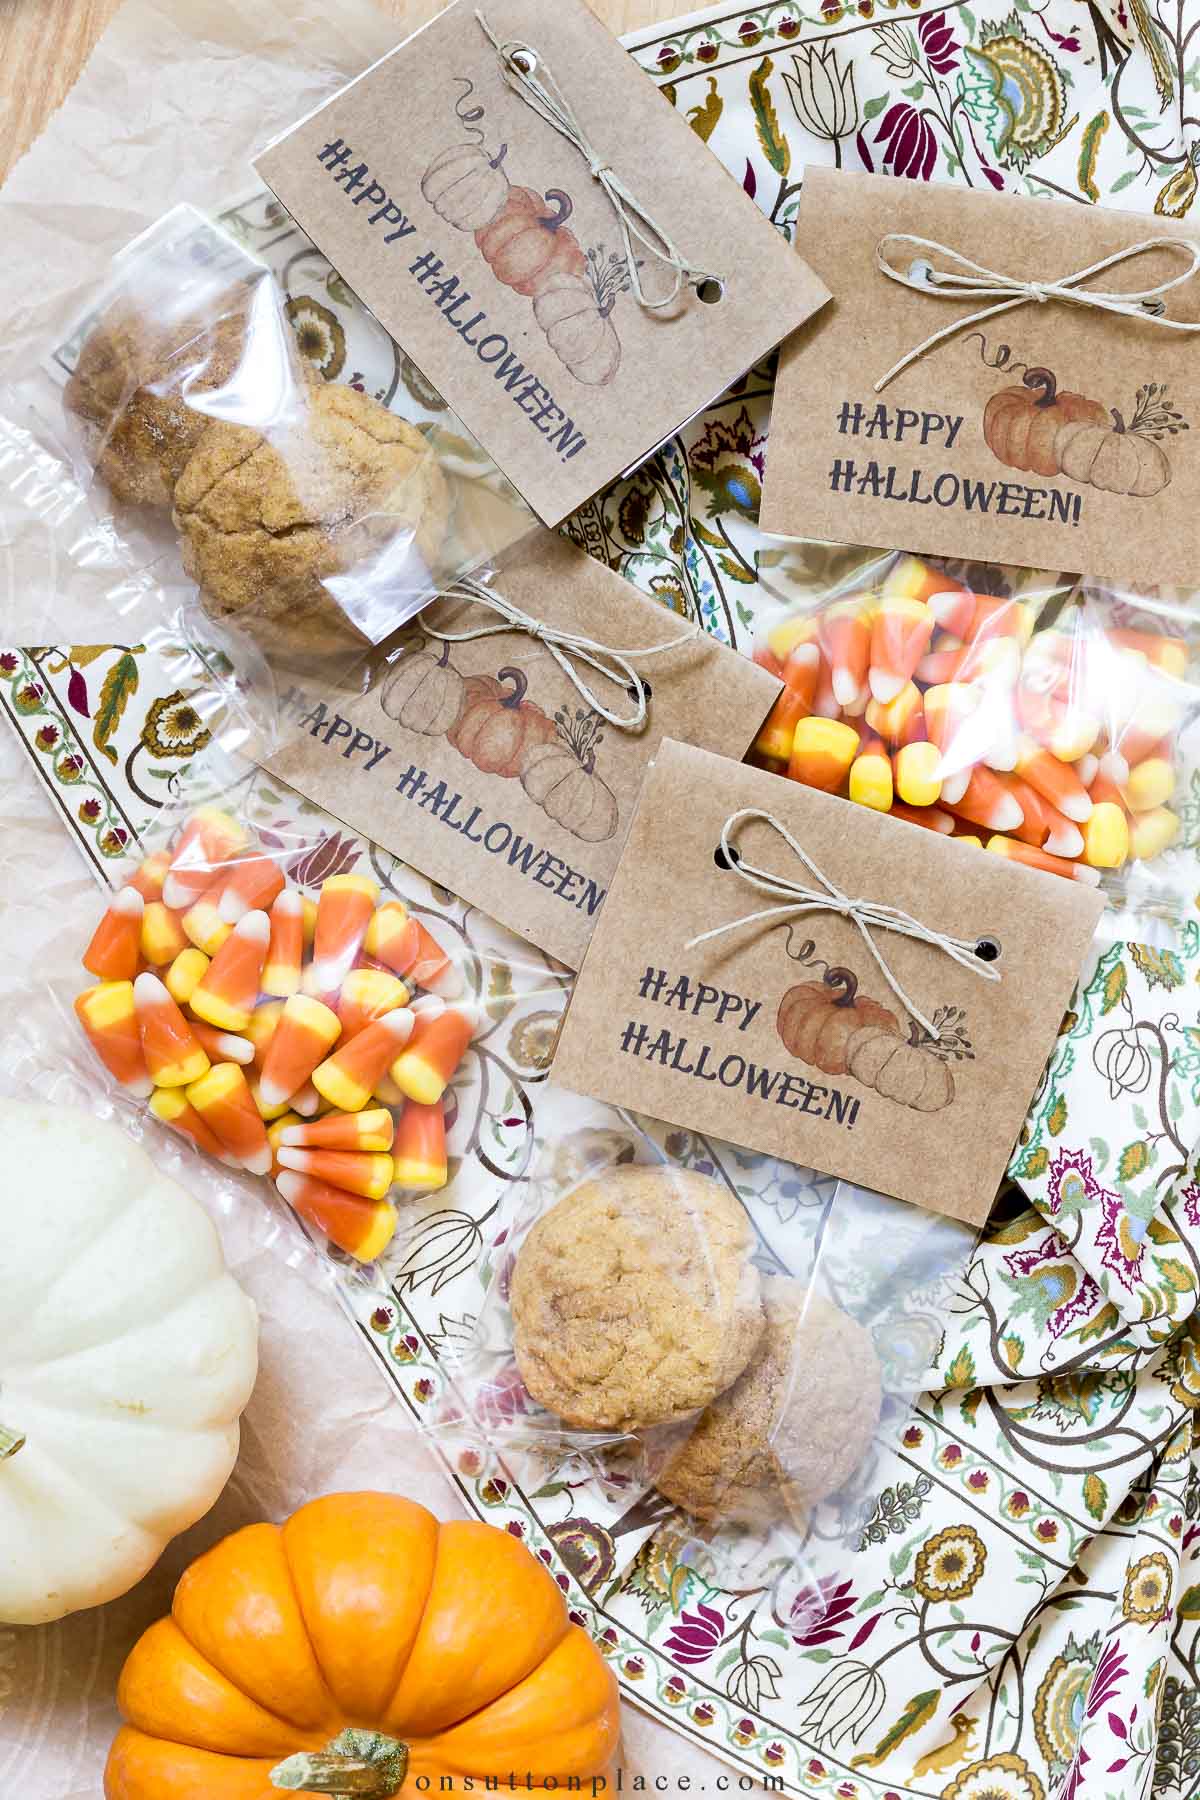 Thanksgiving treat bags with free printable